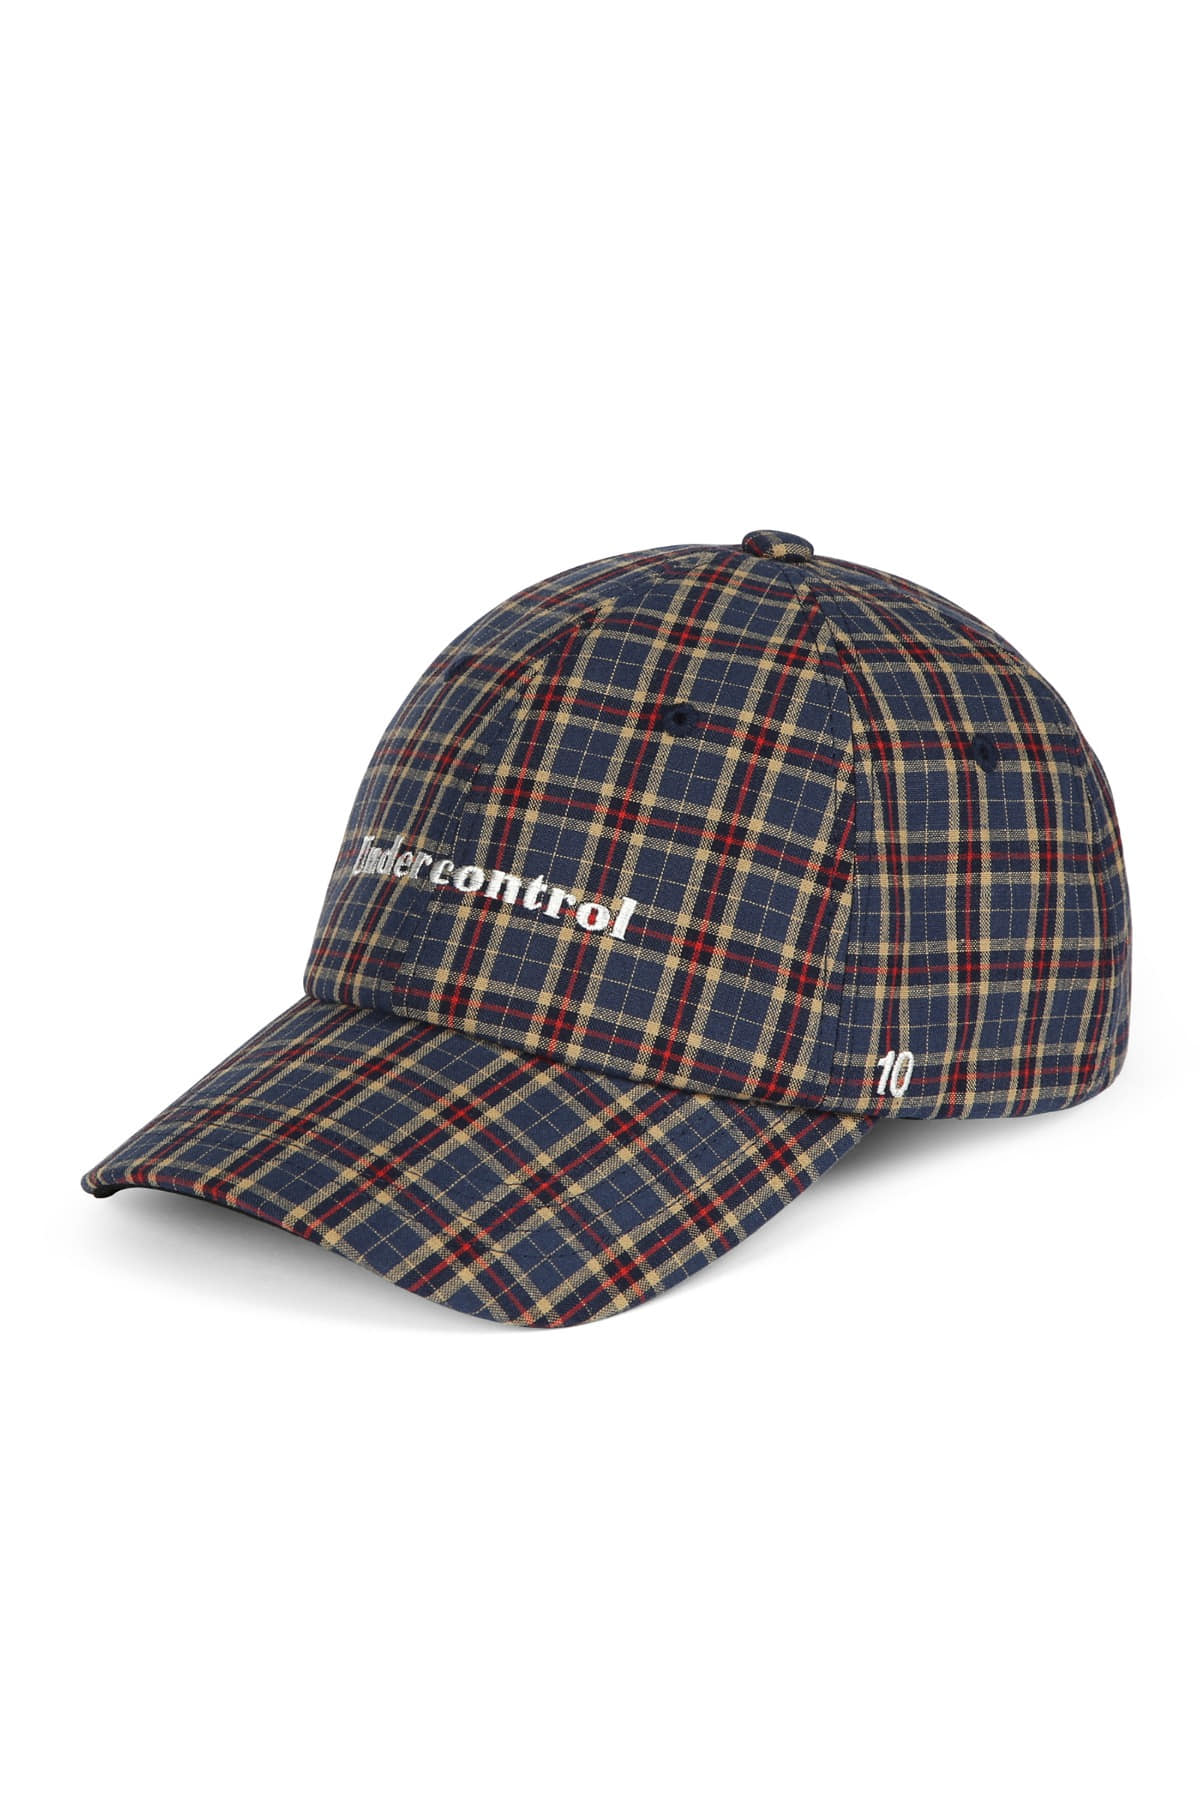 DIDONE / AUTHENTIC B B / NAVY CHECK